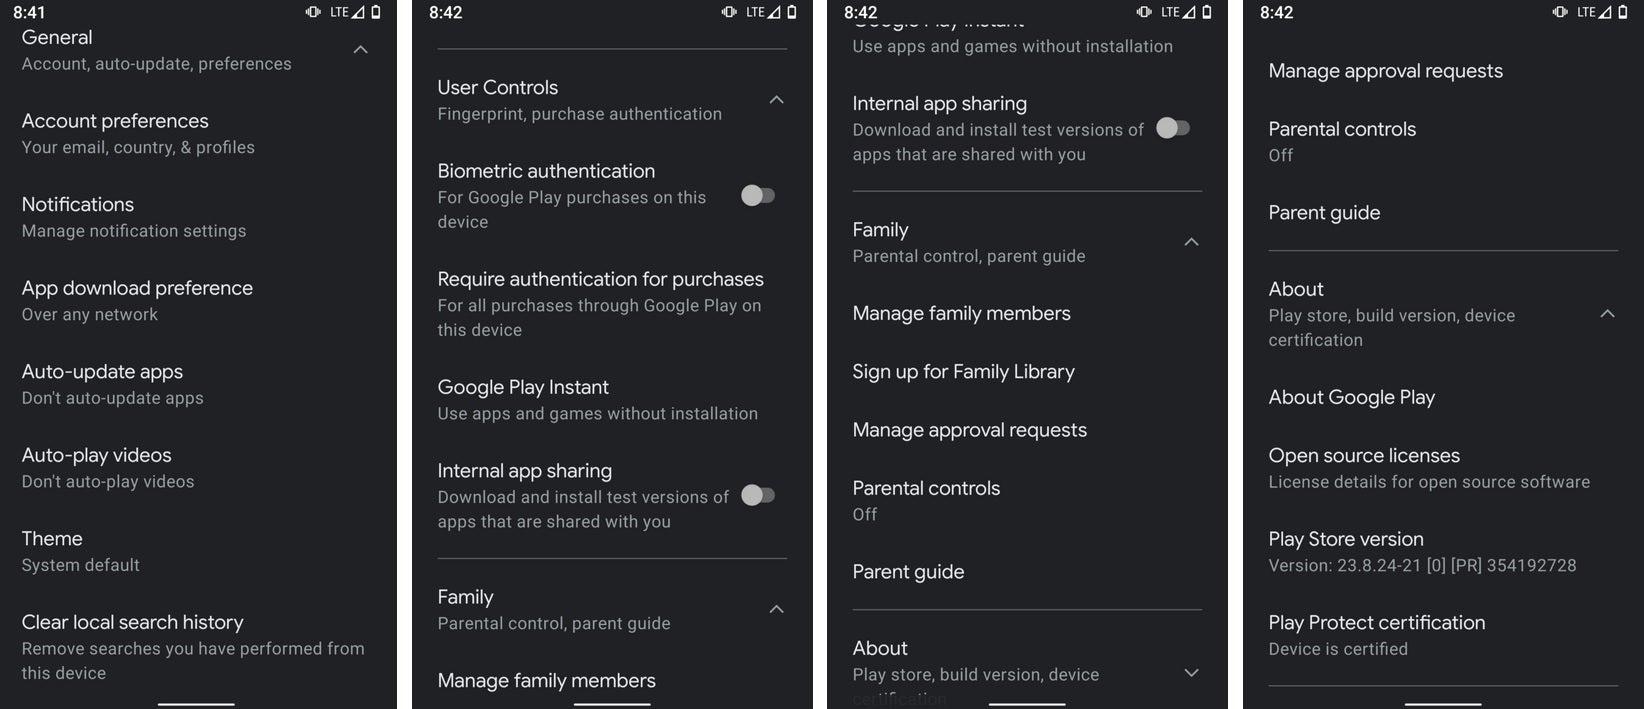 Screenshot shows update that Google is testing for the Play Store - Google tests Play Store settings redesign